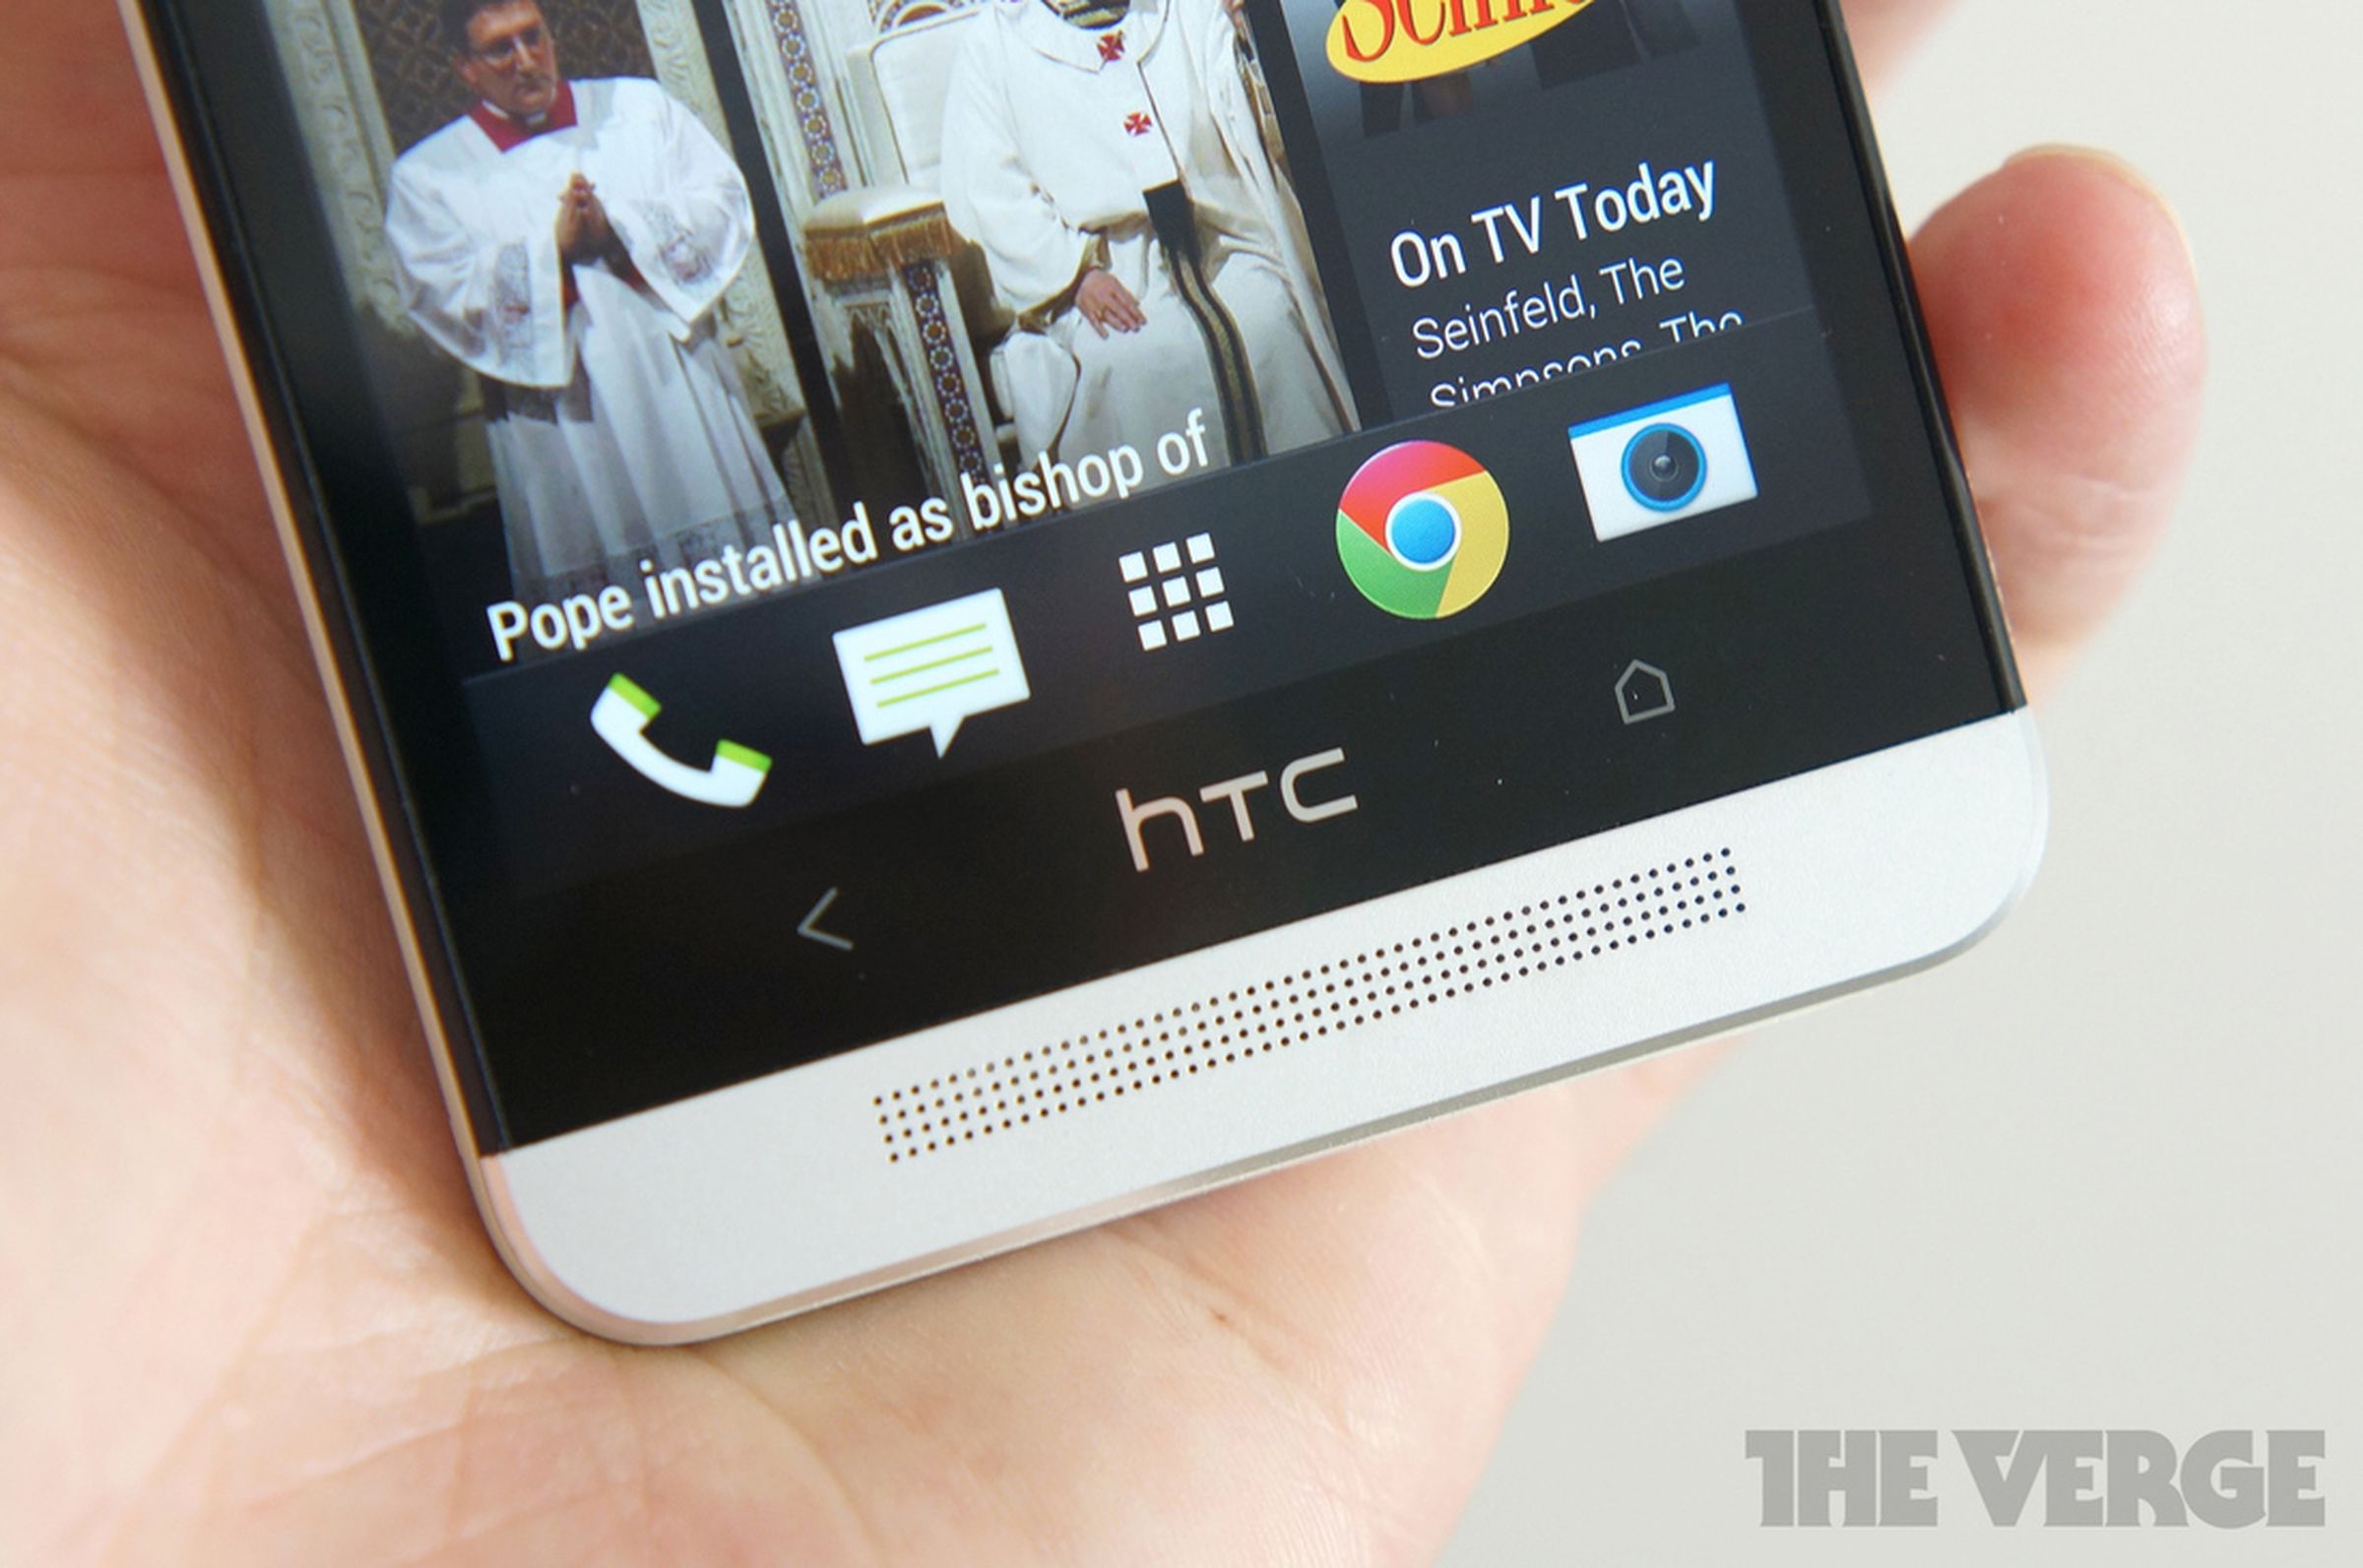 HTC One for AT&T review pictures